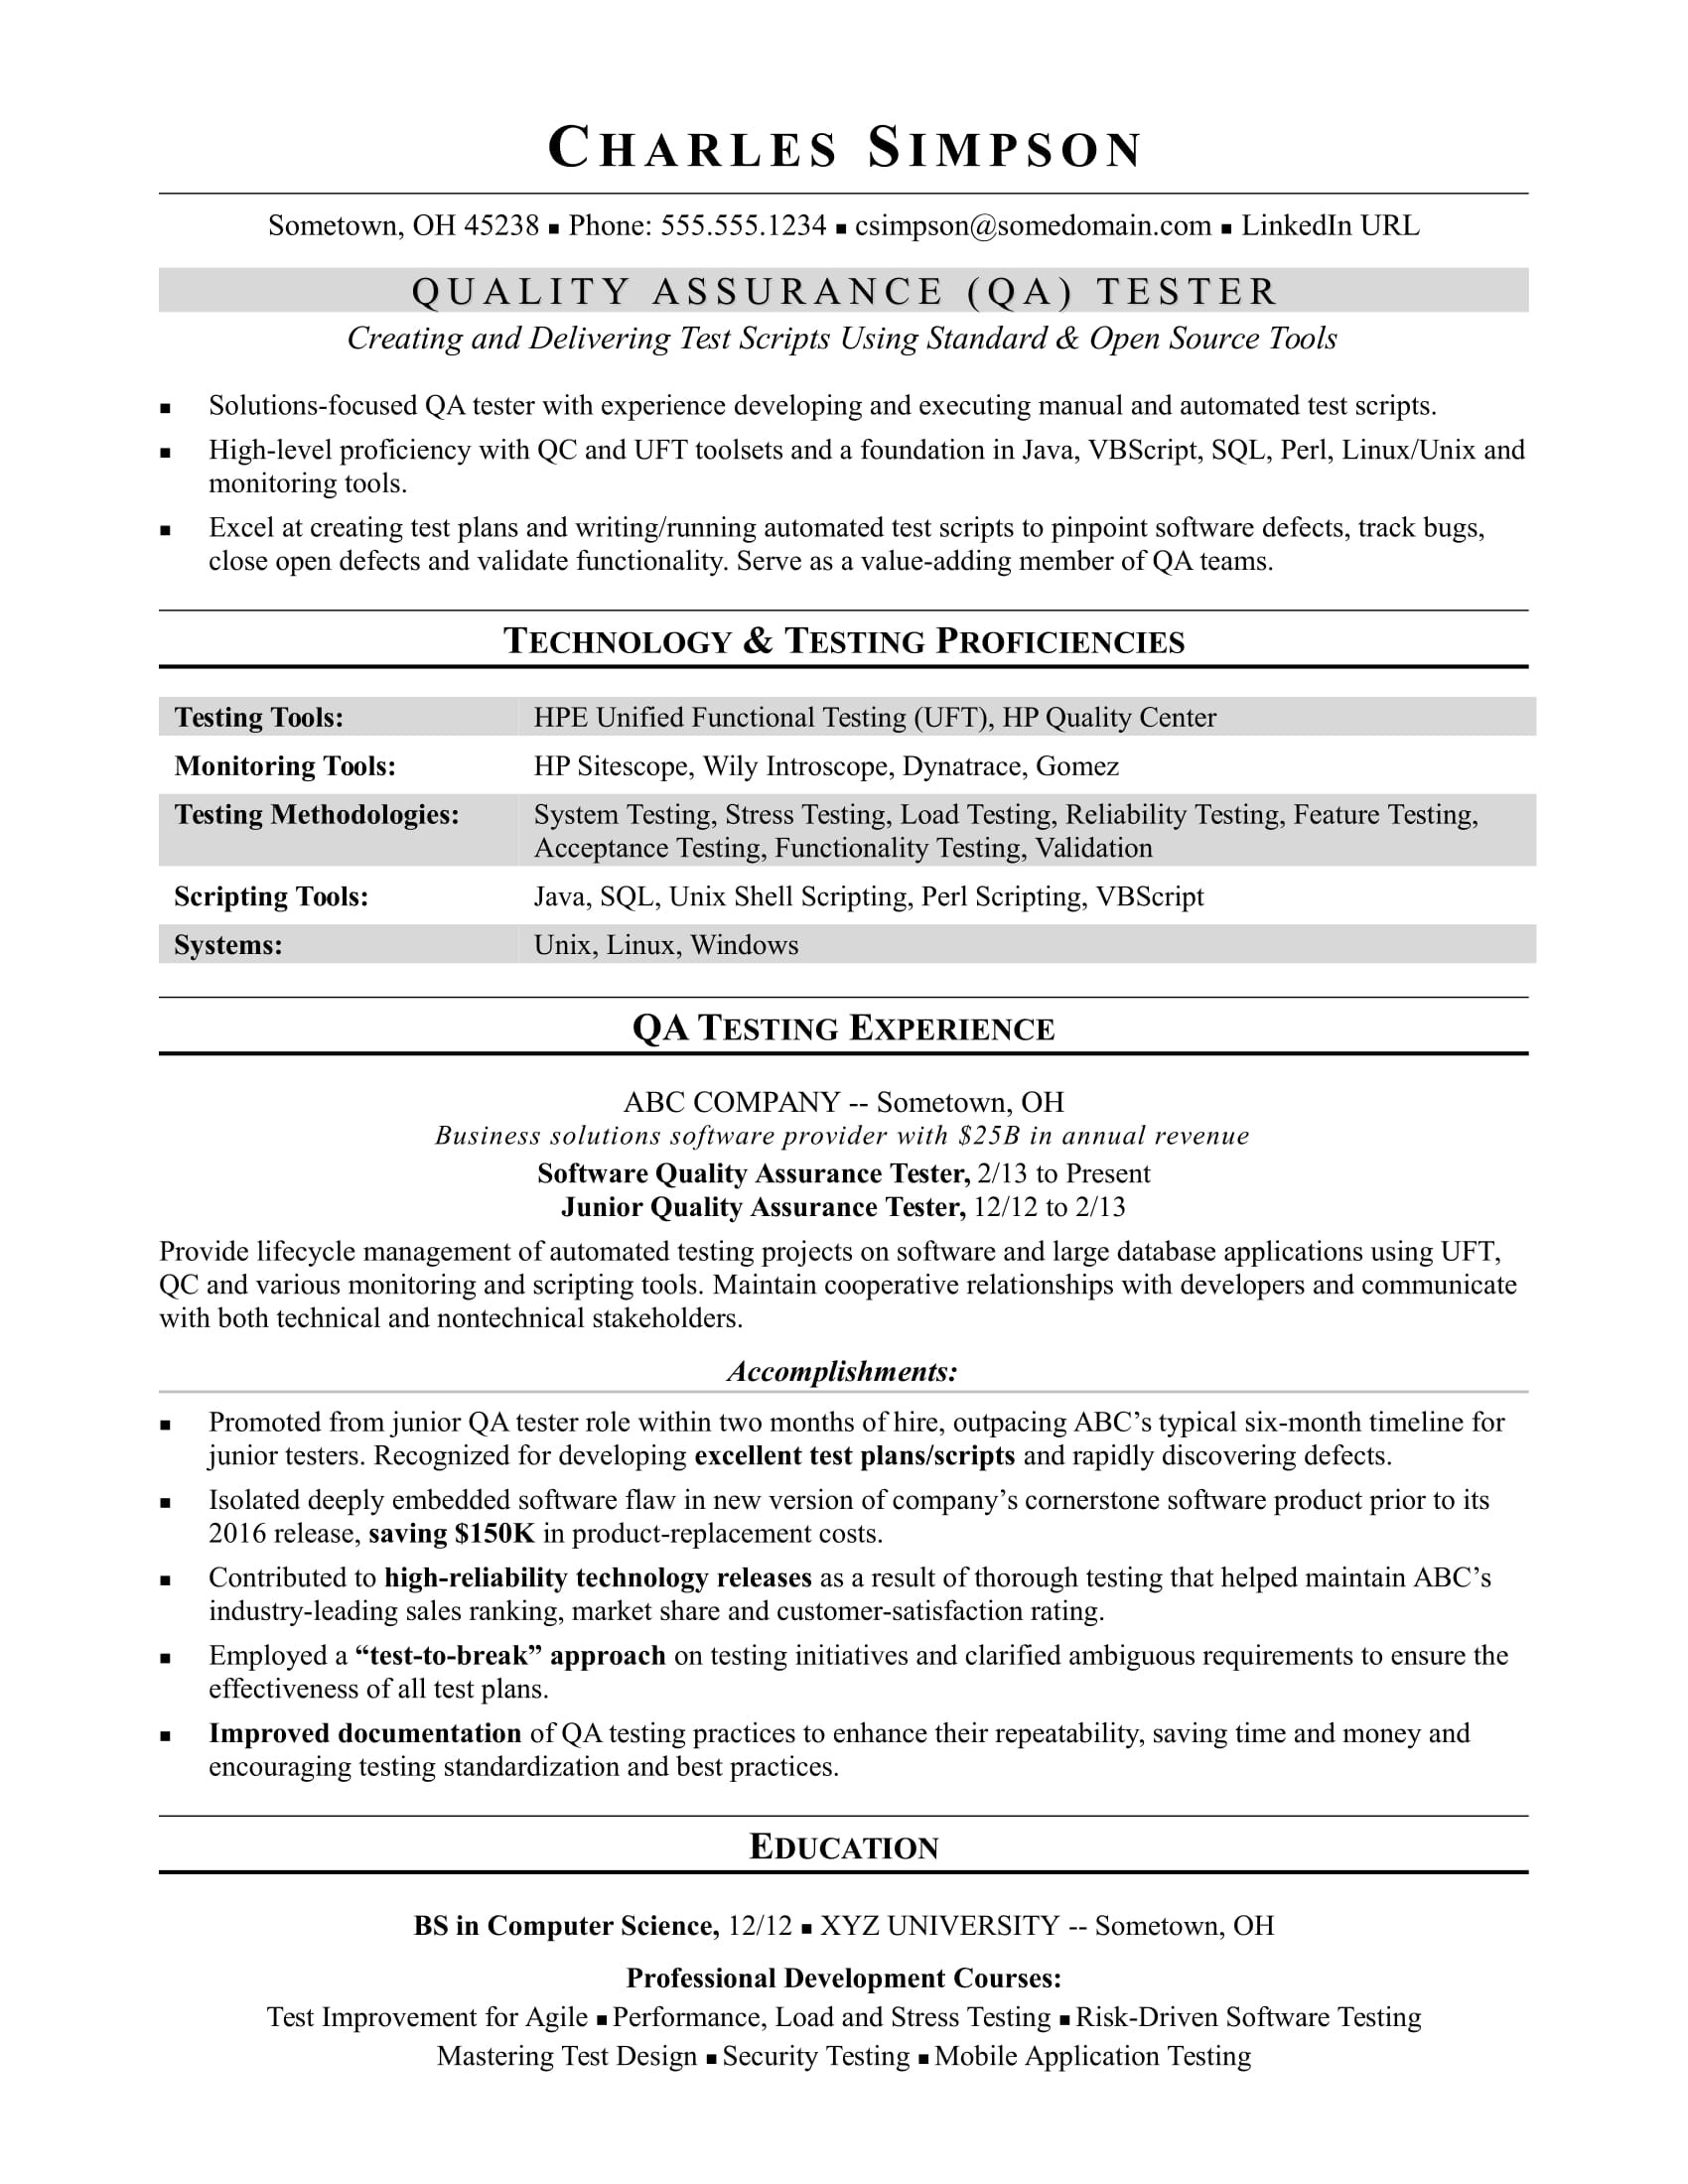 Sample Qa Resume with Agile Experience Sample Resume for A Midlevel Qa software Tester Monster.com